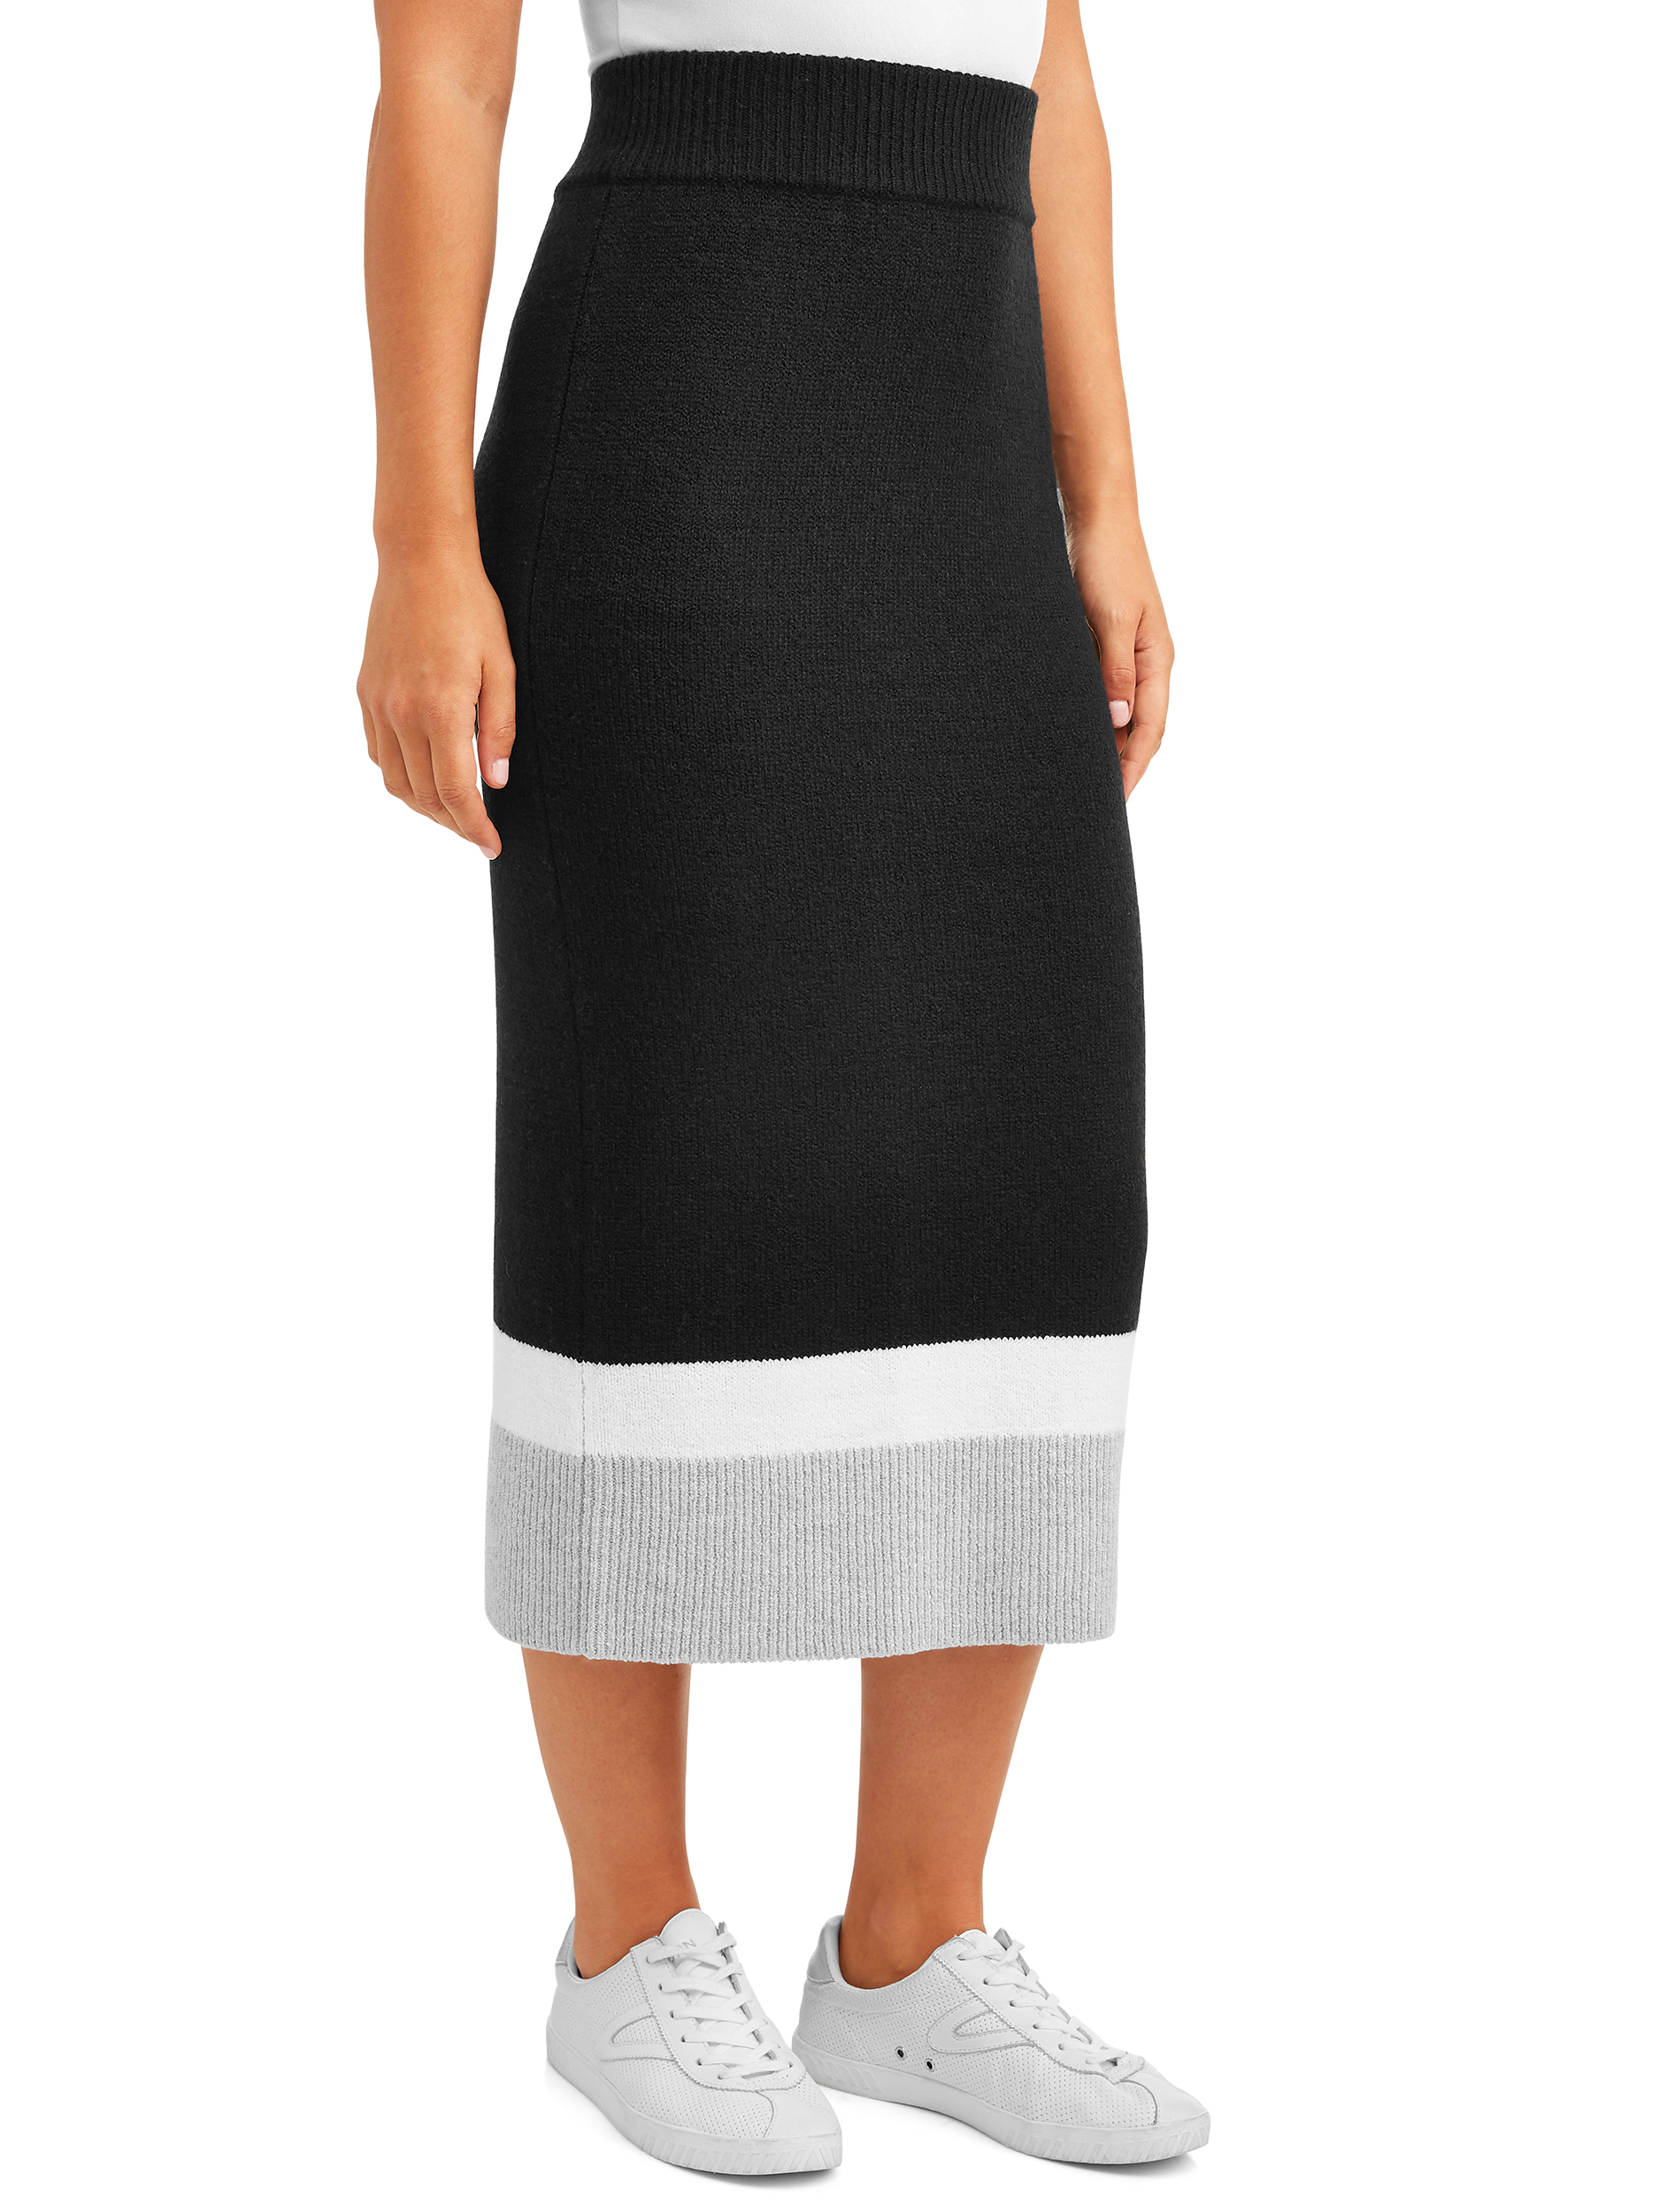 Time and Tru Women's Sweater Skirt - image 5 of 5